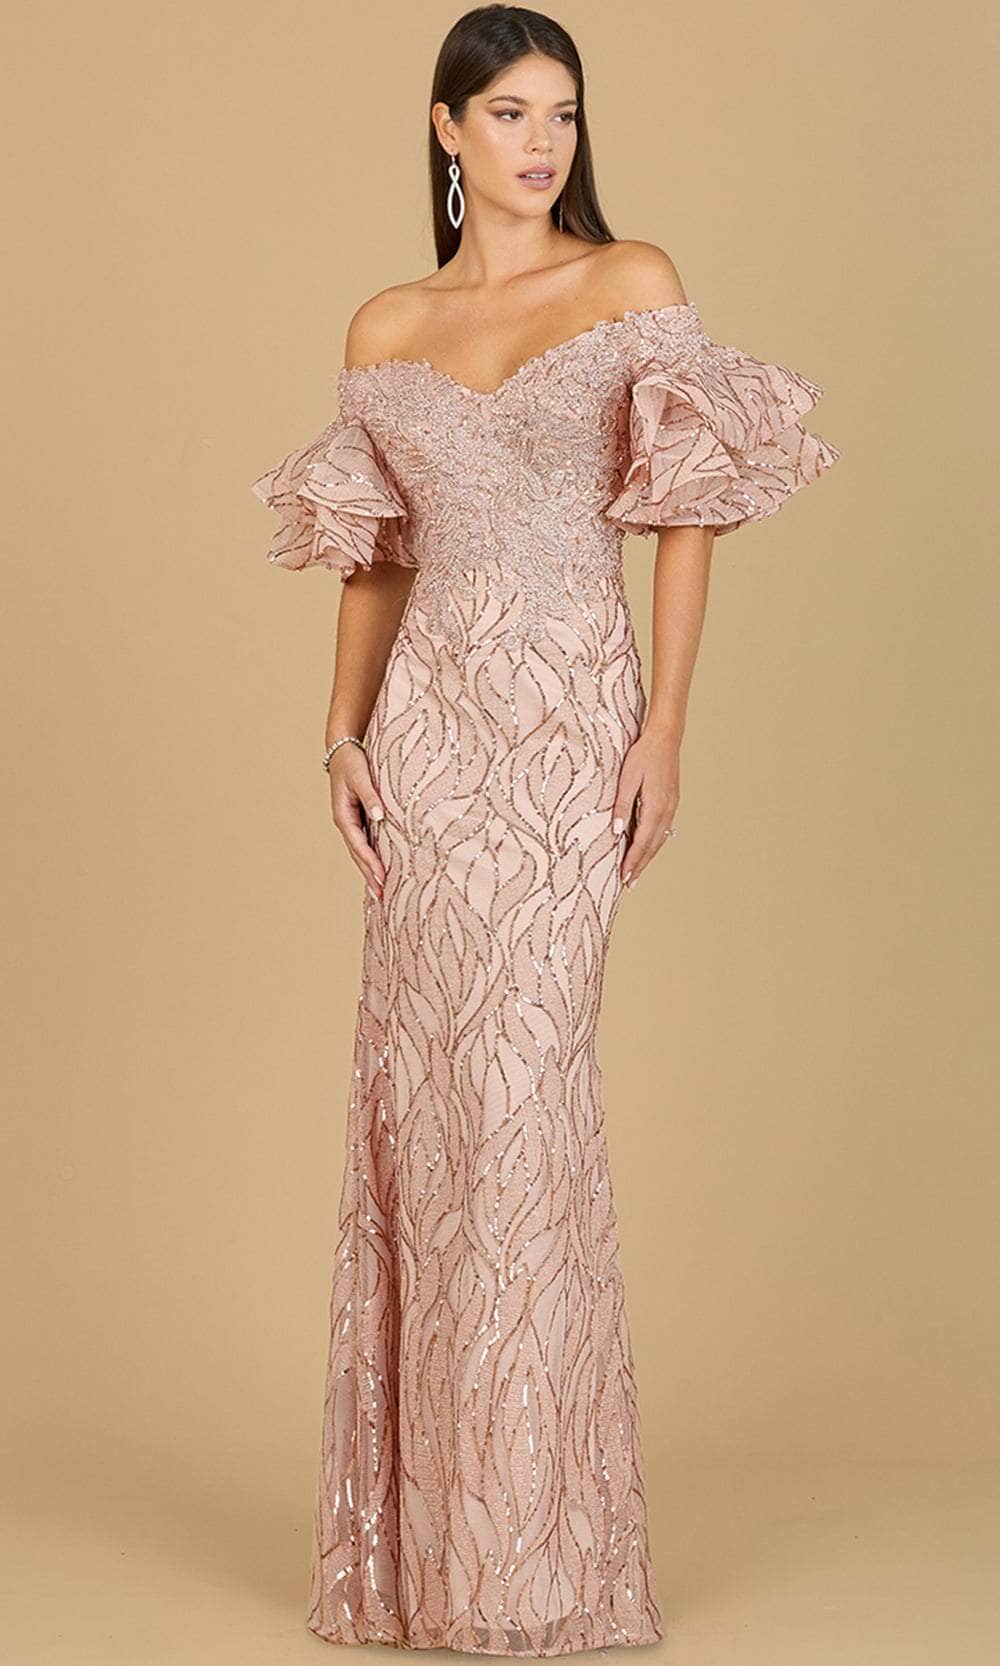 Lara Dresses 29190 - Tiered Sleeve V-Neck Evening Gown Special Occasion Dress 4 / Rose Gold